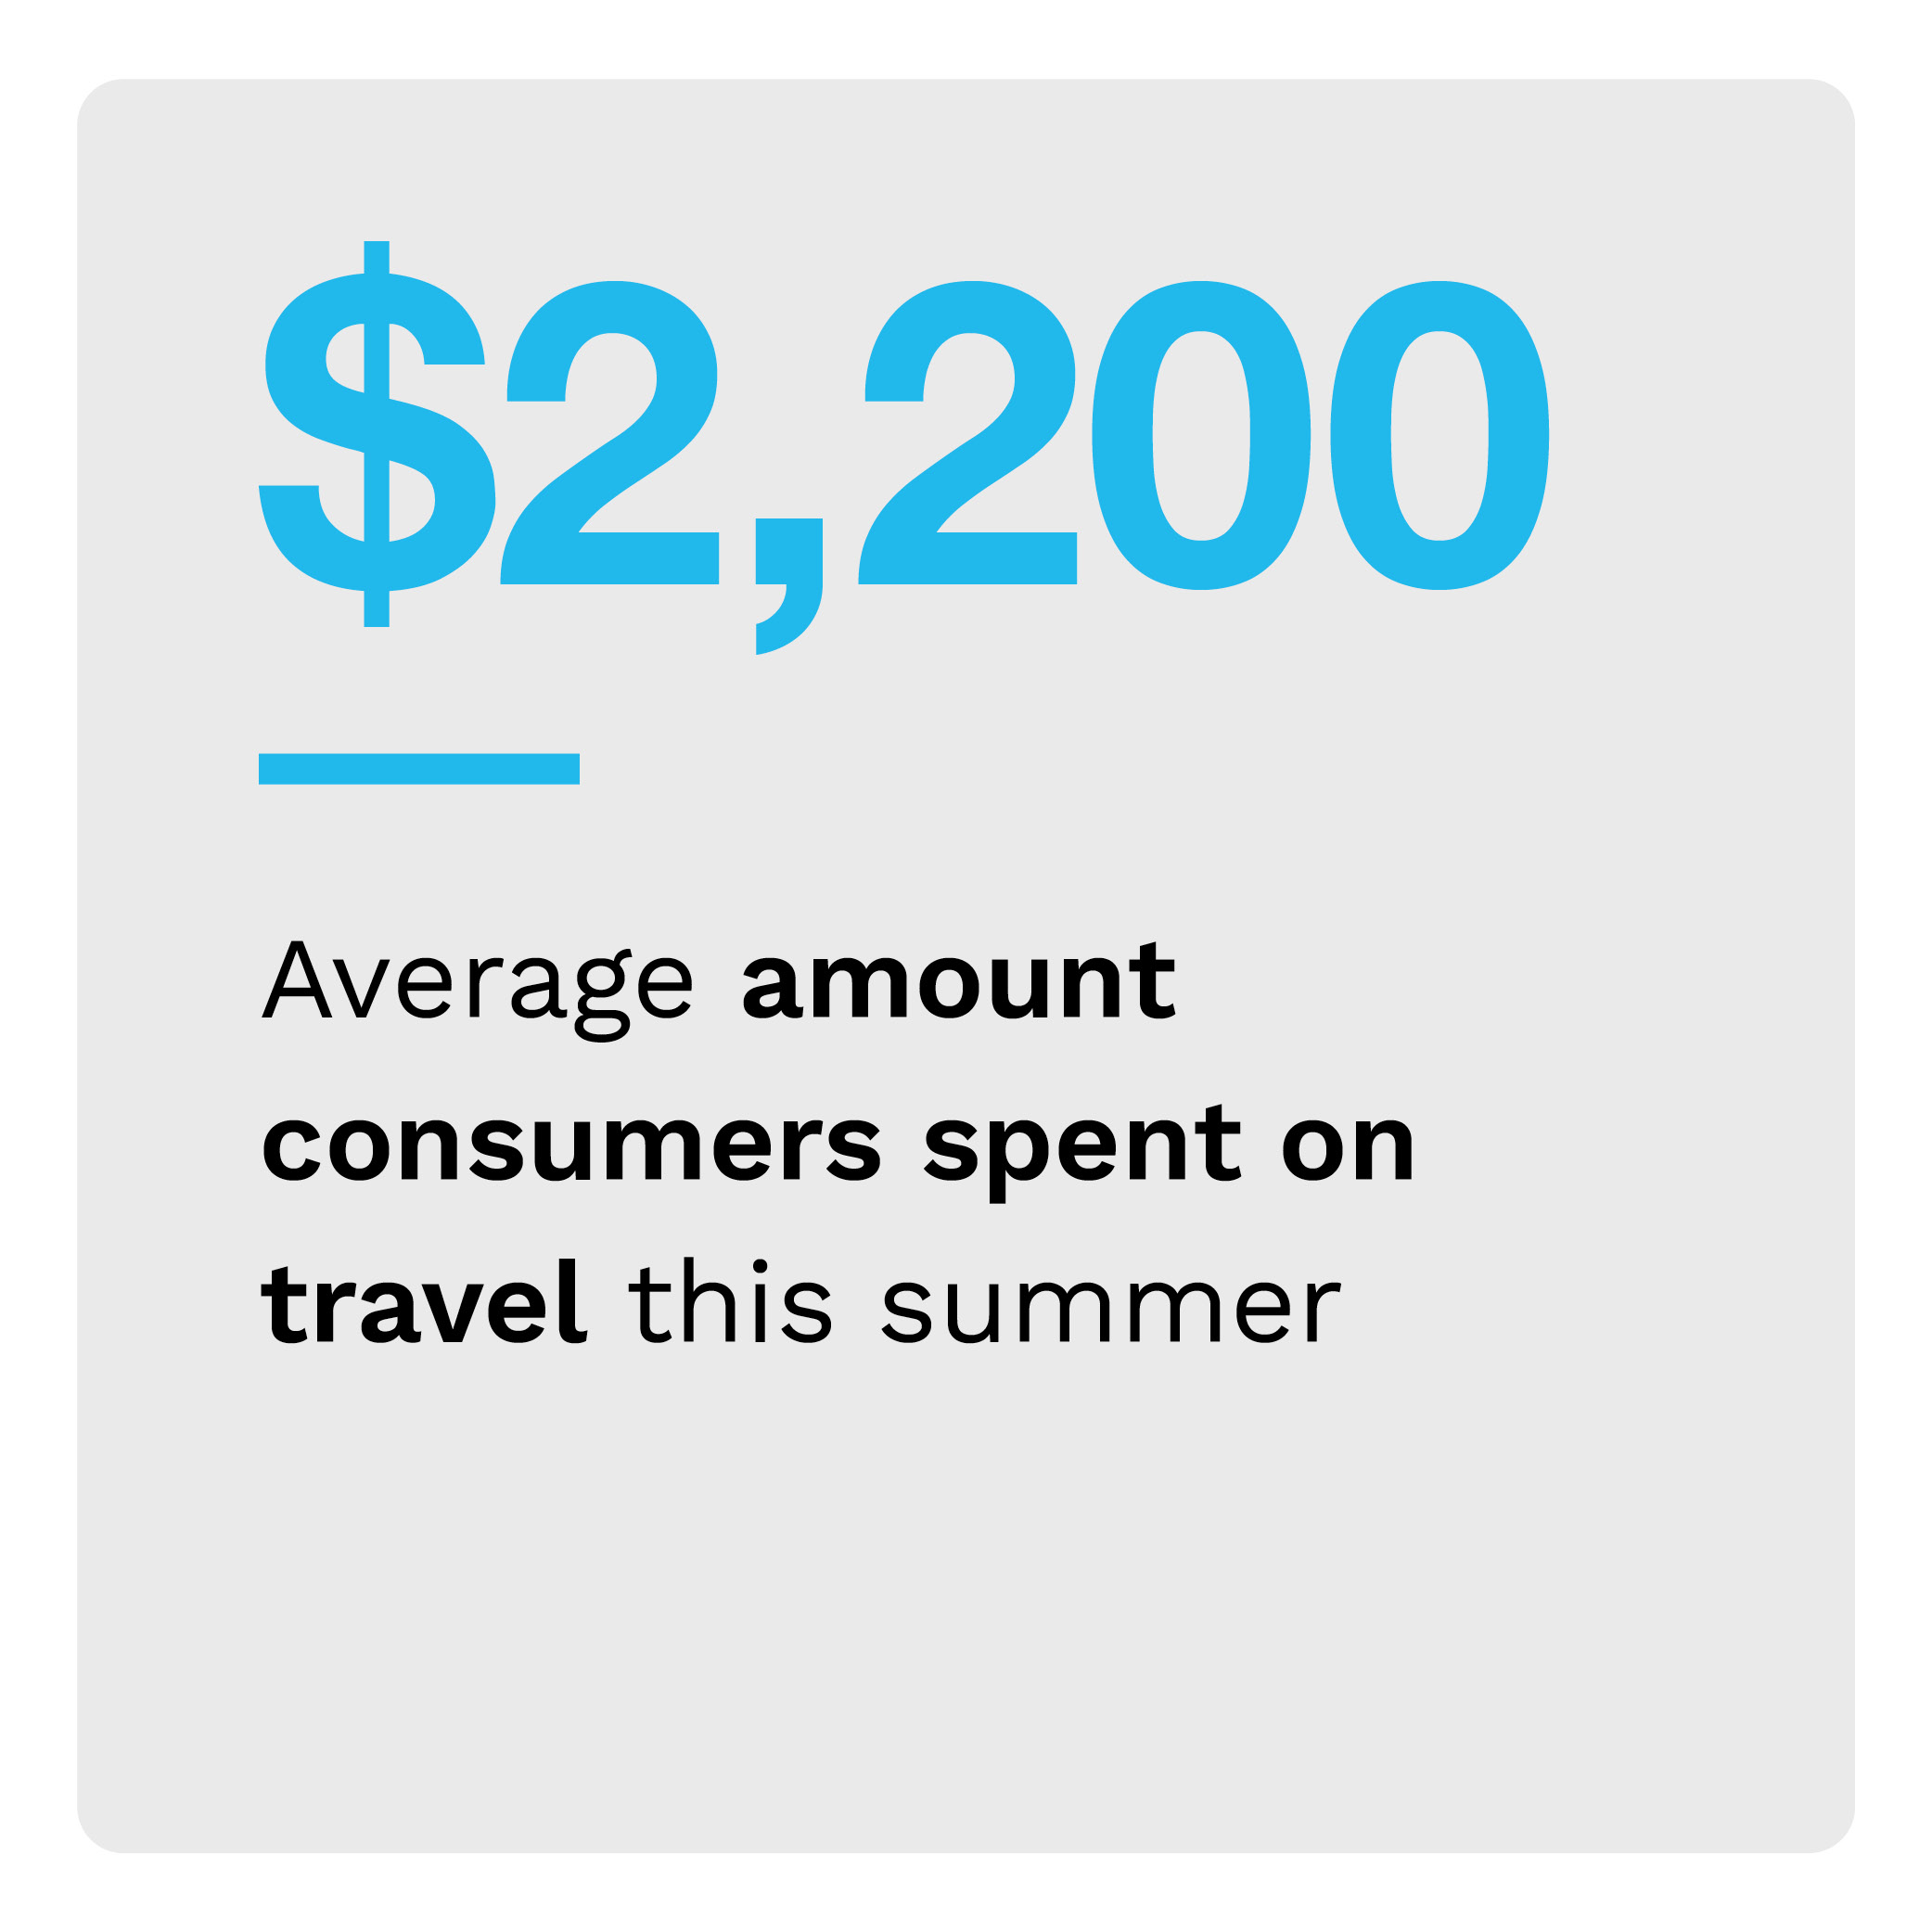 $2,200: Average amount consumers spent on travel this summer